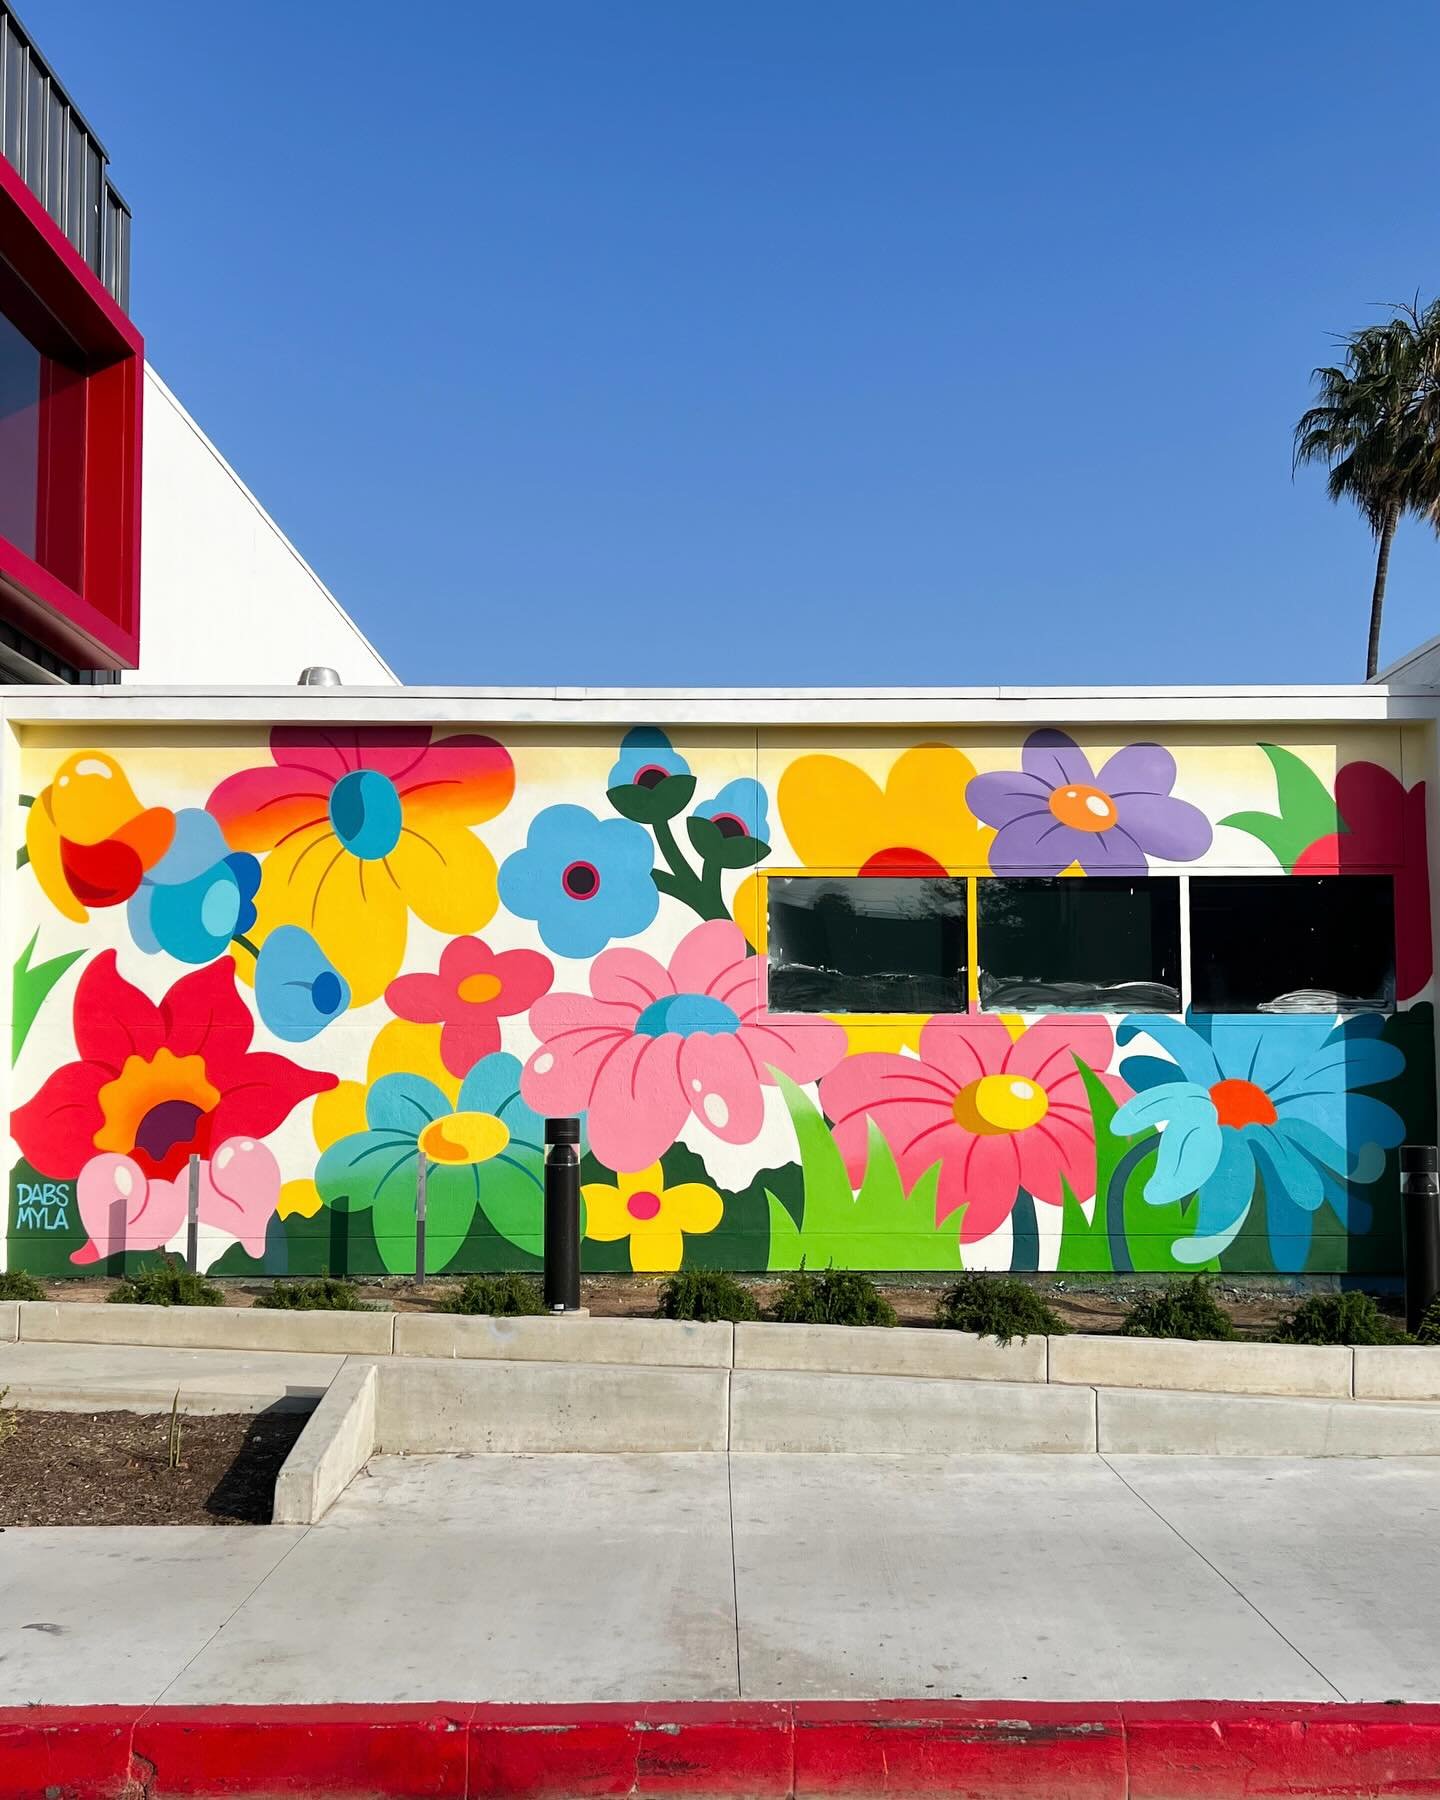 New mural for the @venicefamilyclinic 🌼
Such a pleasure to work with this wonderful clinic that provides health care for families and individuals who might otherwise go without the care they need.
Huge thanks to everyone involved at the clinic and T